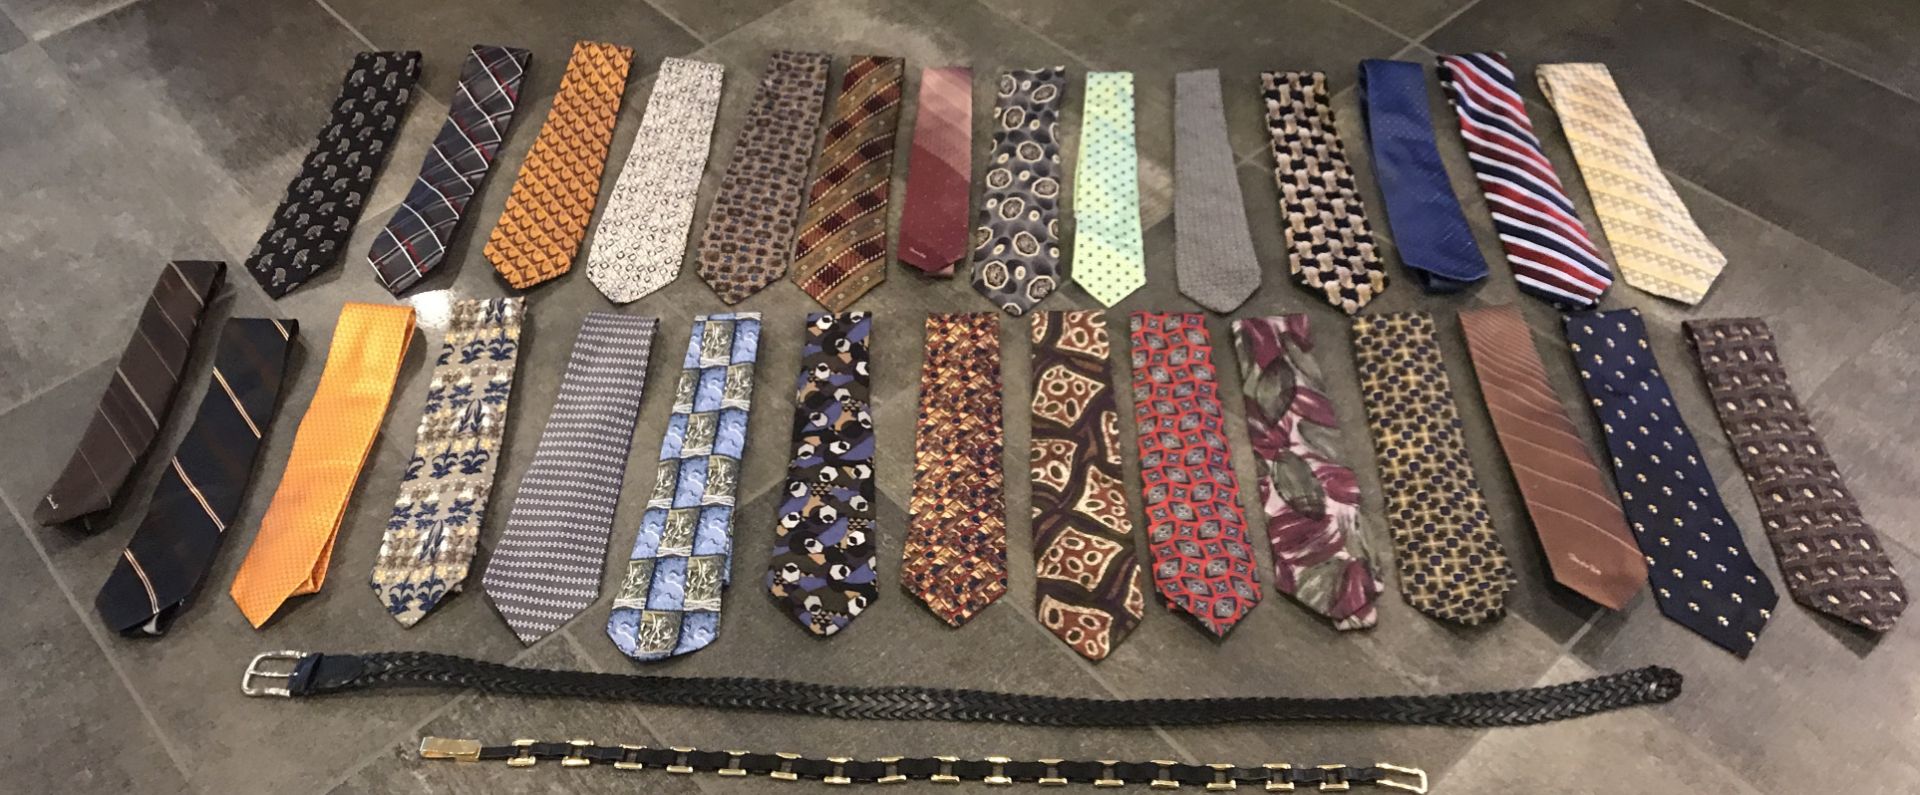 29 ASSORTED DESIGNER TIES AND TWO BLACK BELTS